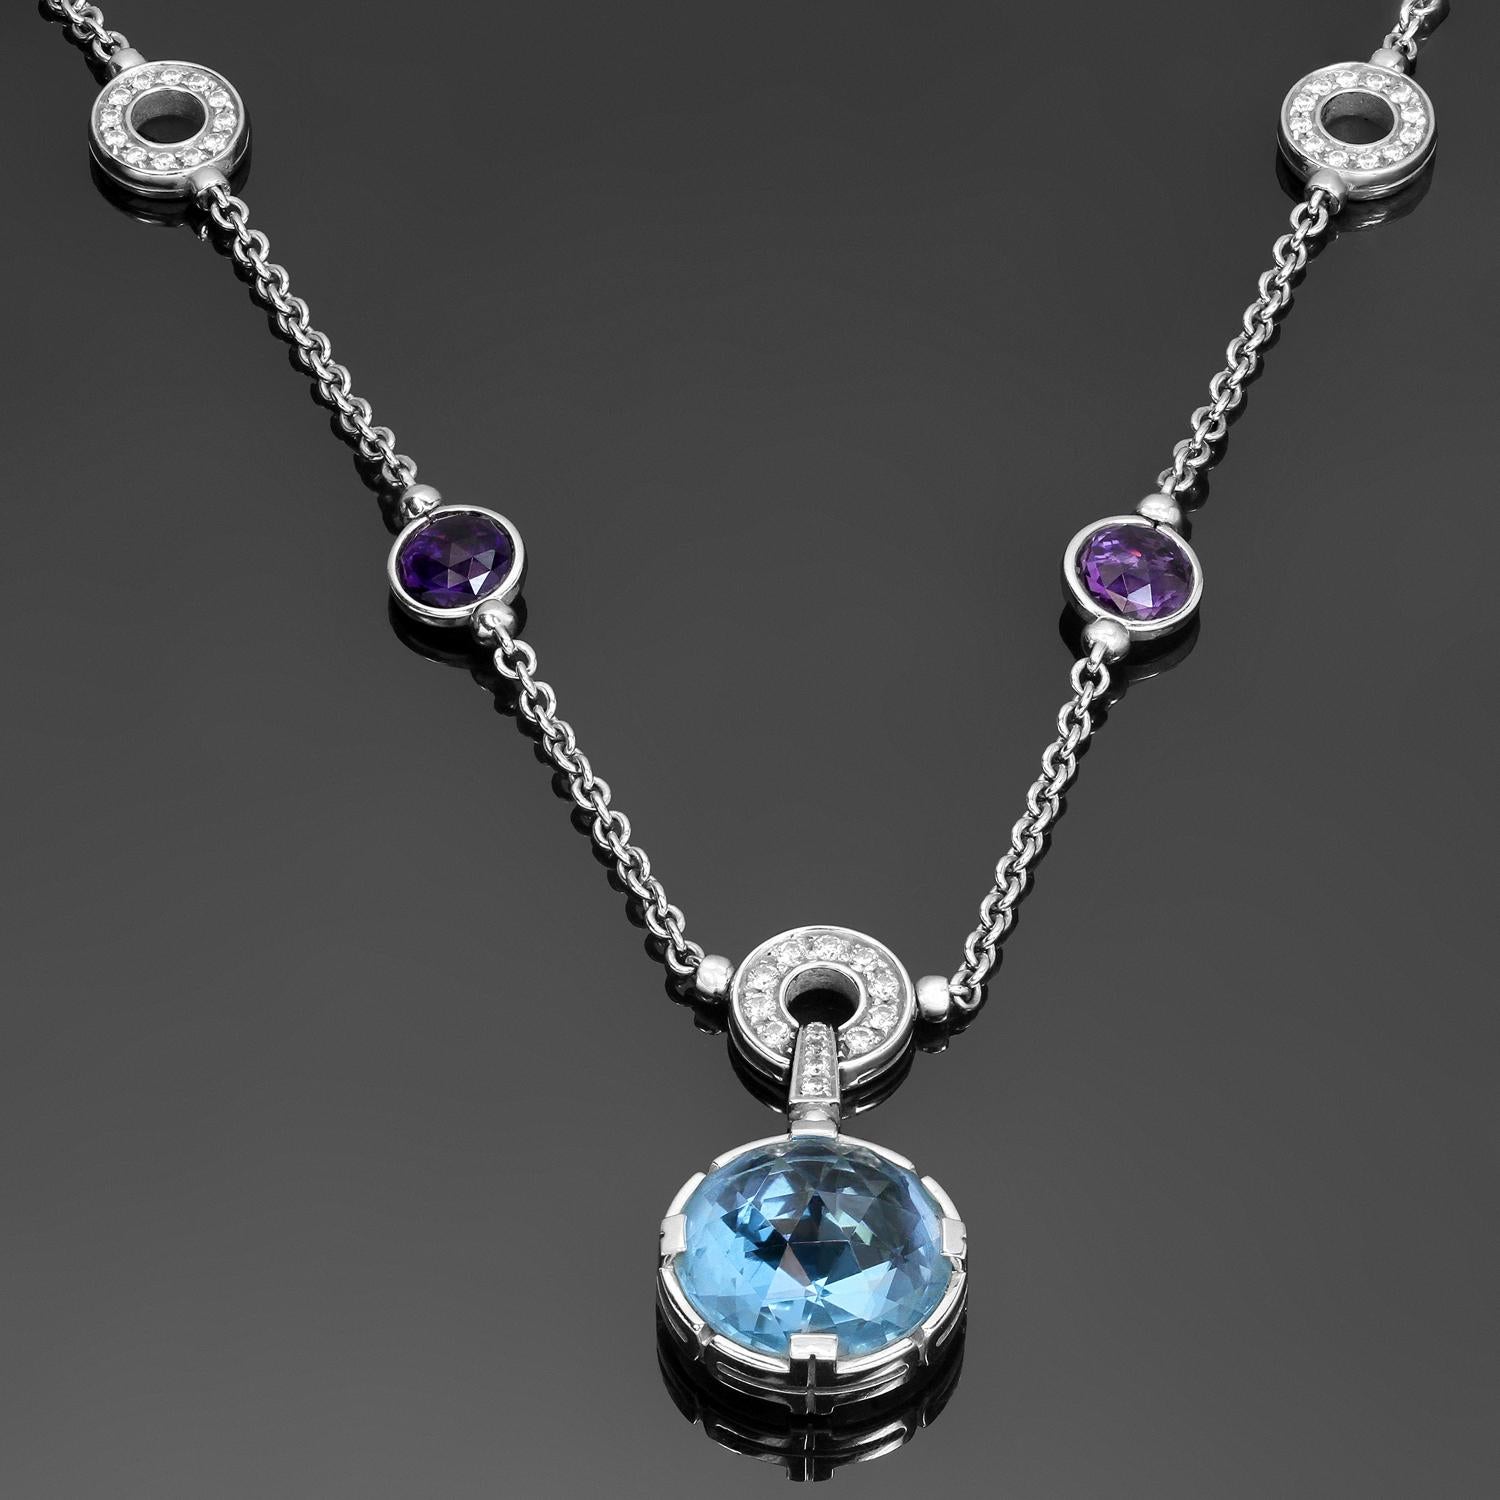 This fabulous necklace from vibrant Parentesi Cocktail collection is crafted in 18k white gold and features checkerboard faceted amethyst and topaz stones enhanced by sparkling diamonds - 3 amethyst, 2 topaz, 2 Bvlgari' hoops, 3 circular hoops